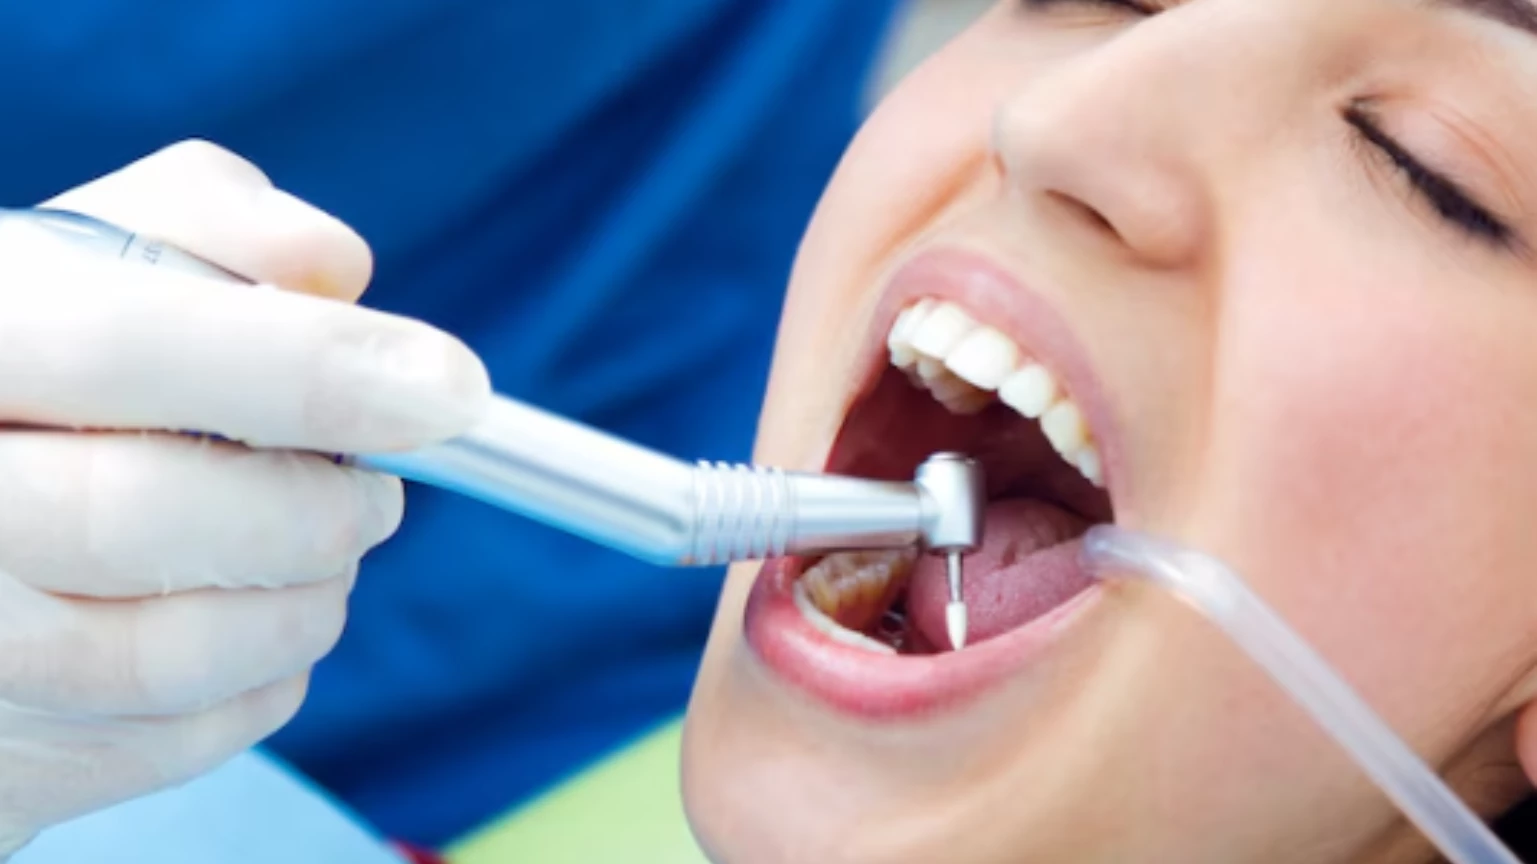 Where to Find the Best Teeth Cleaning Dentist Near Me